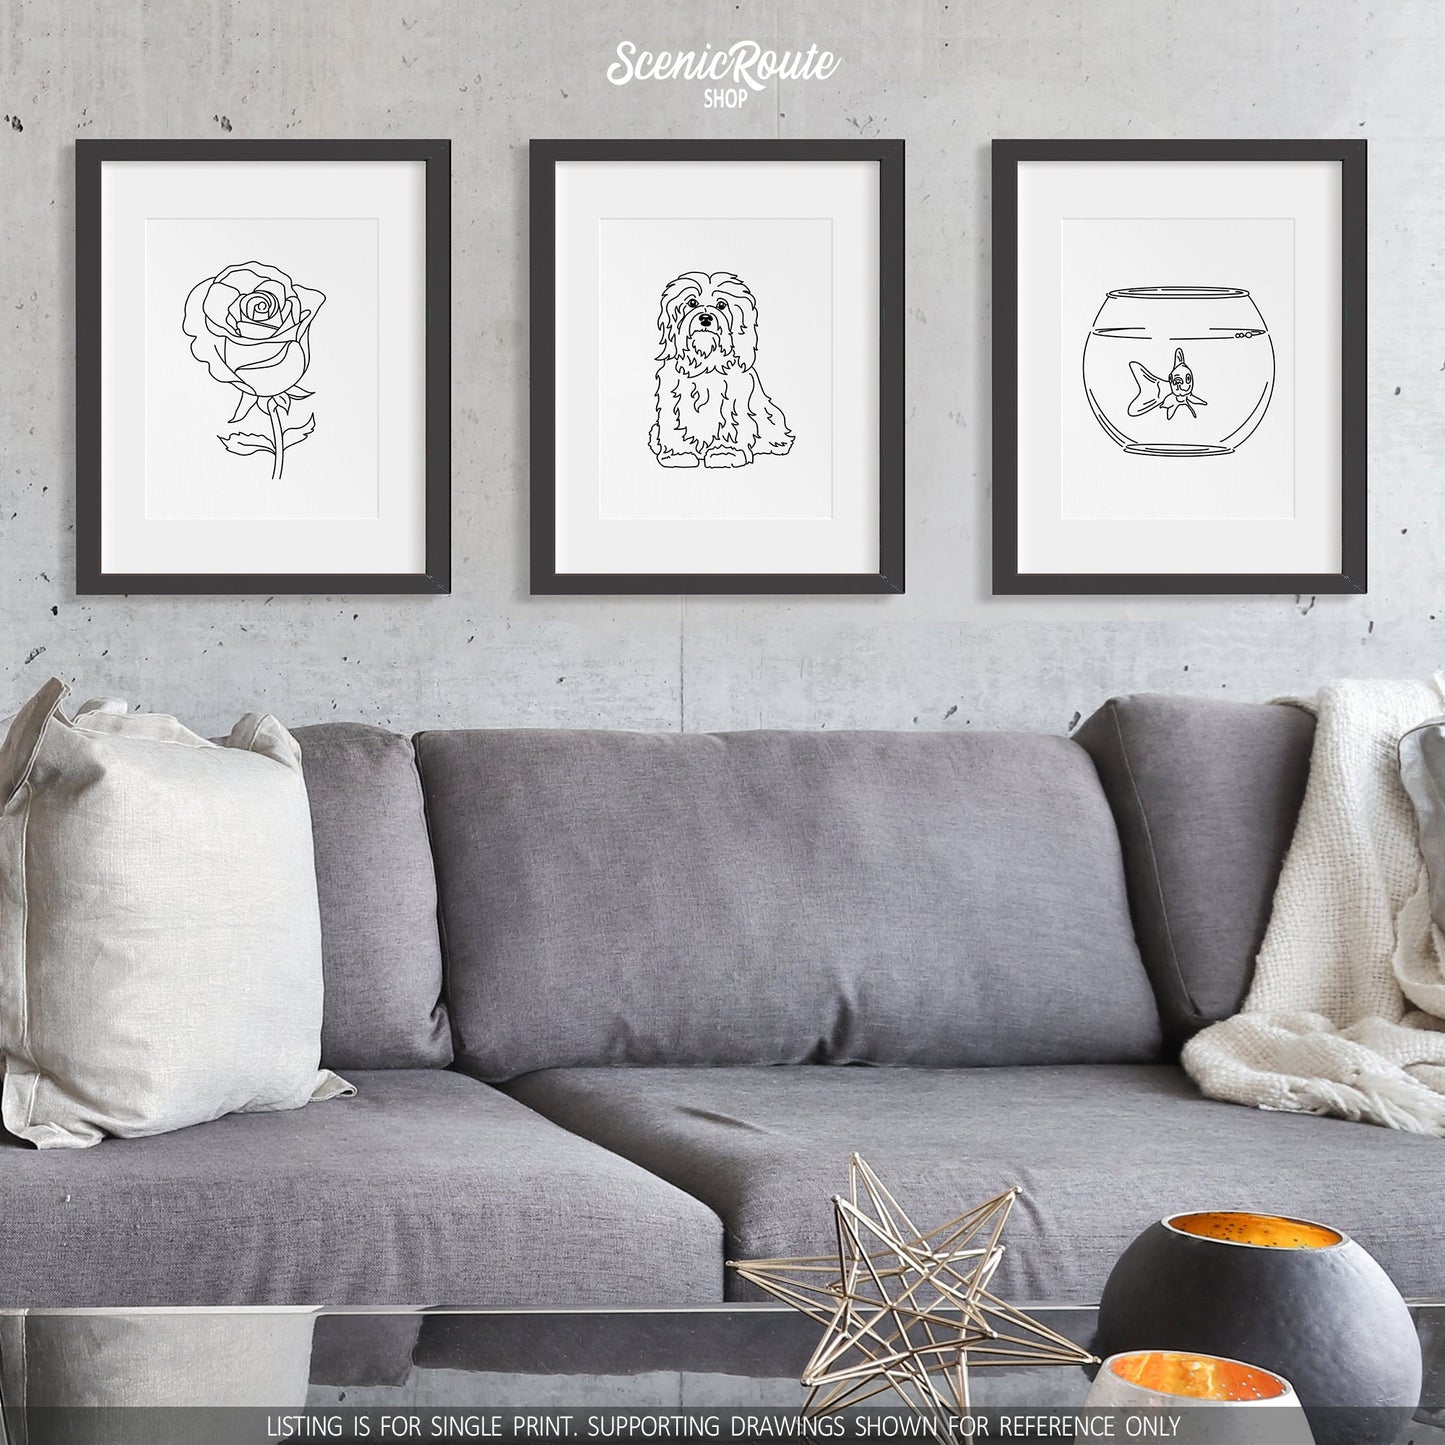 A group of three framed drawings on a white wall above a couch. The line art drawings include a Rose flower, a Havanese dog, and a Goldfish in a bowl